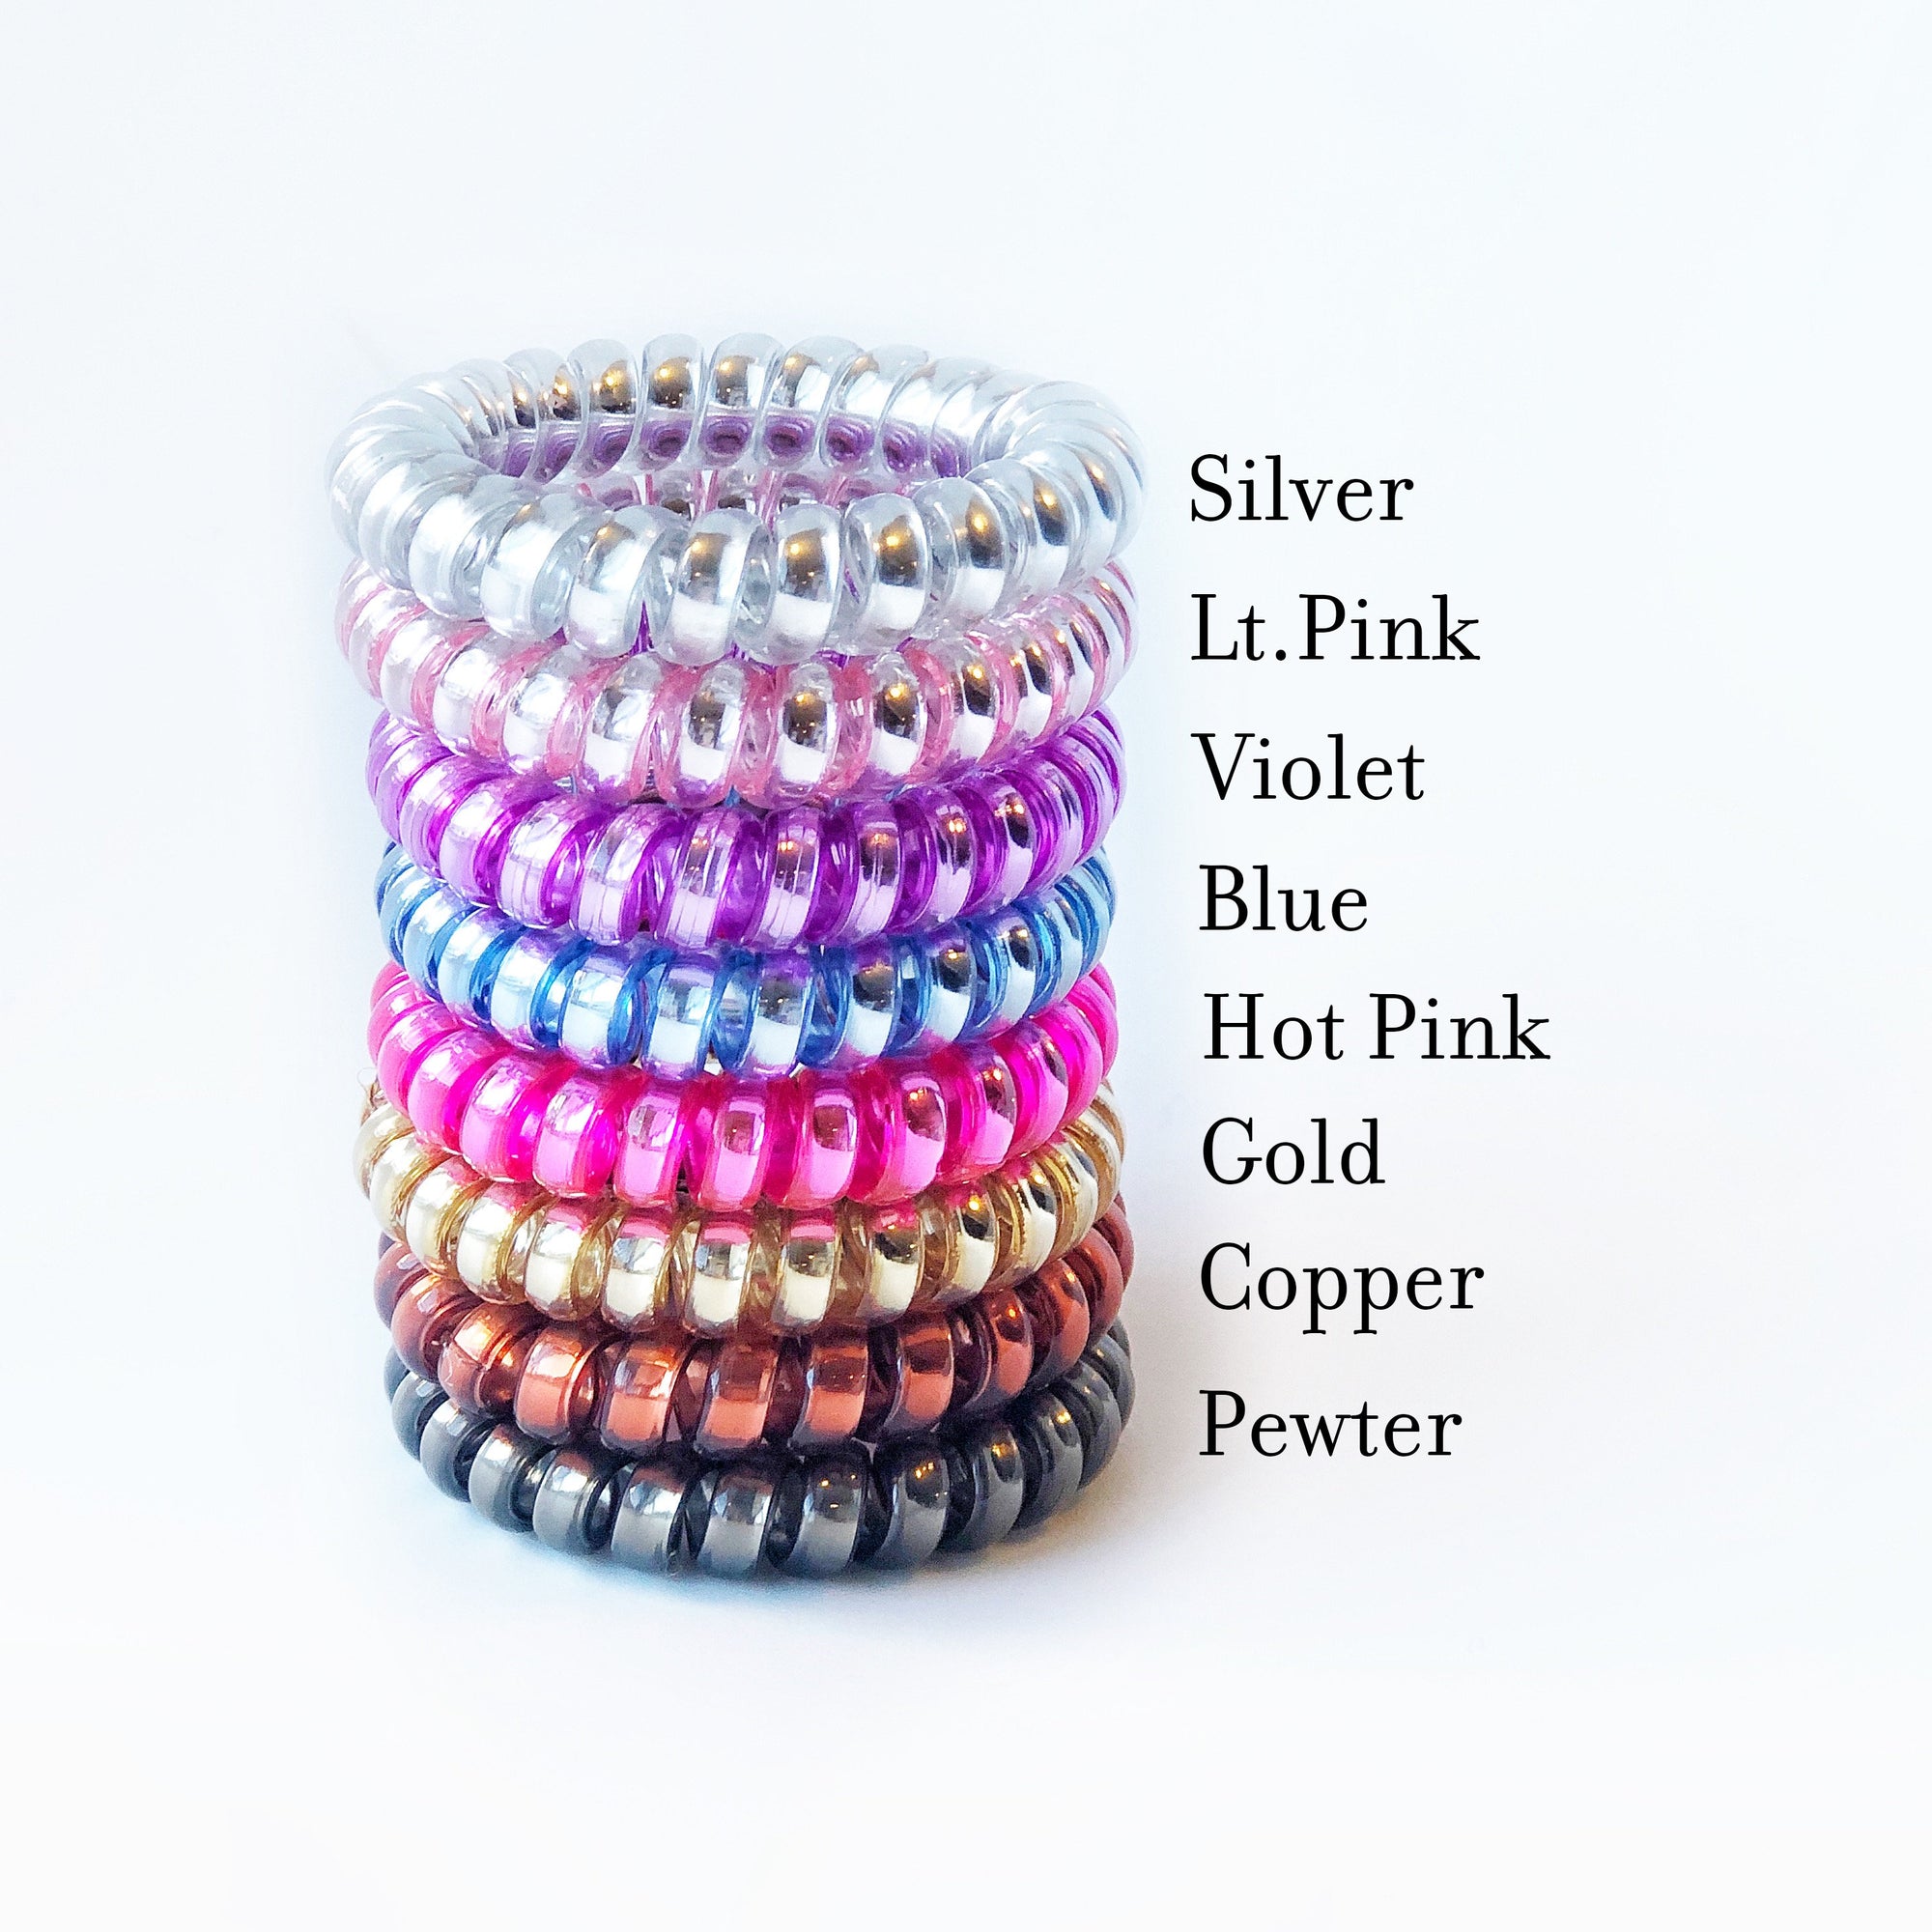 Sleepover Birthday Party Favors, Spiral Hair Tie Slumber Party Favors, Sleepover Party, Sleepover Hair Don't Care, Telephone Cord Hair Ties - @PlumPolkaDot 